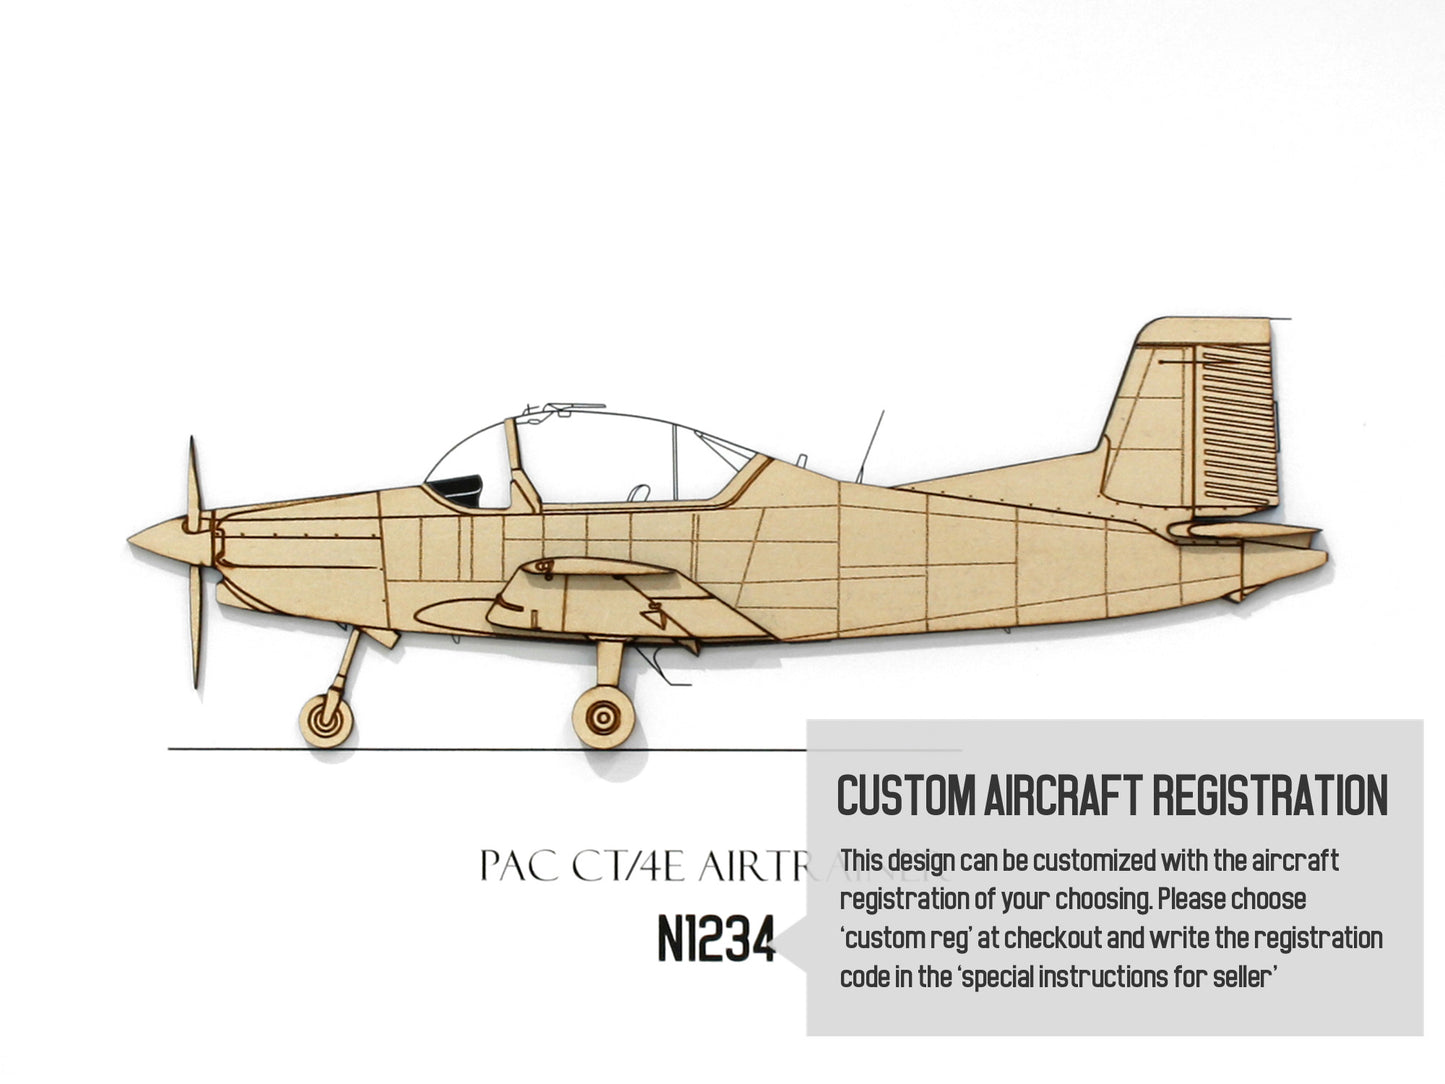 PAC CT-4E Airtrainer aviation gifts